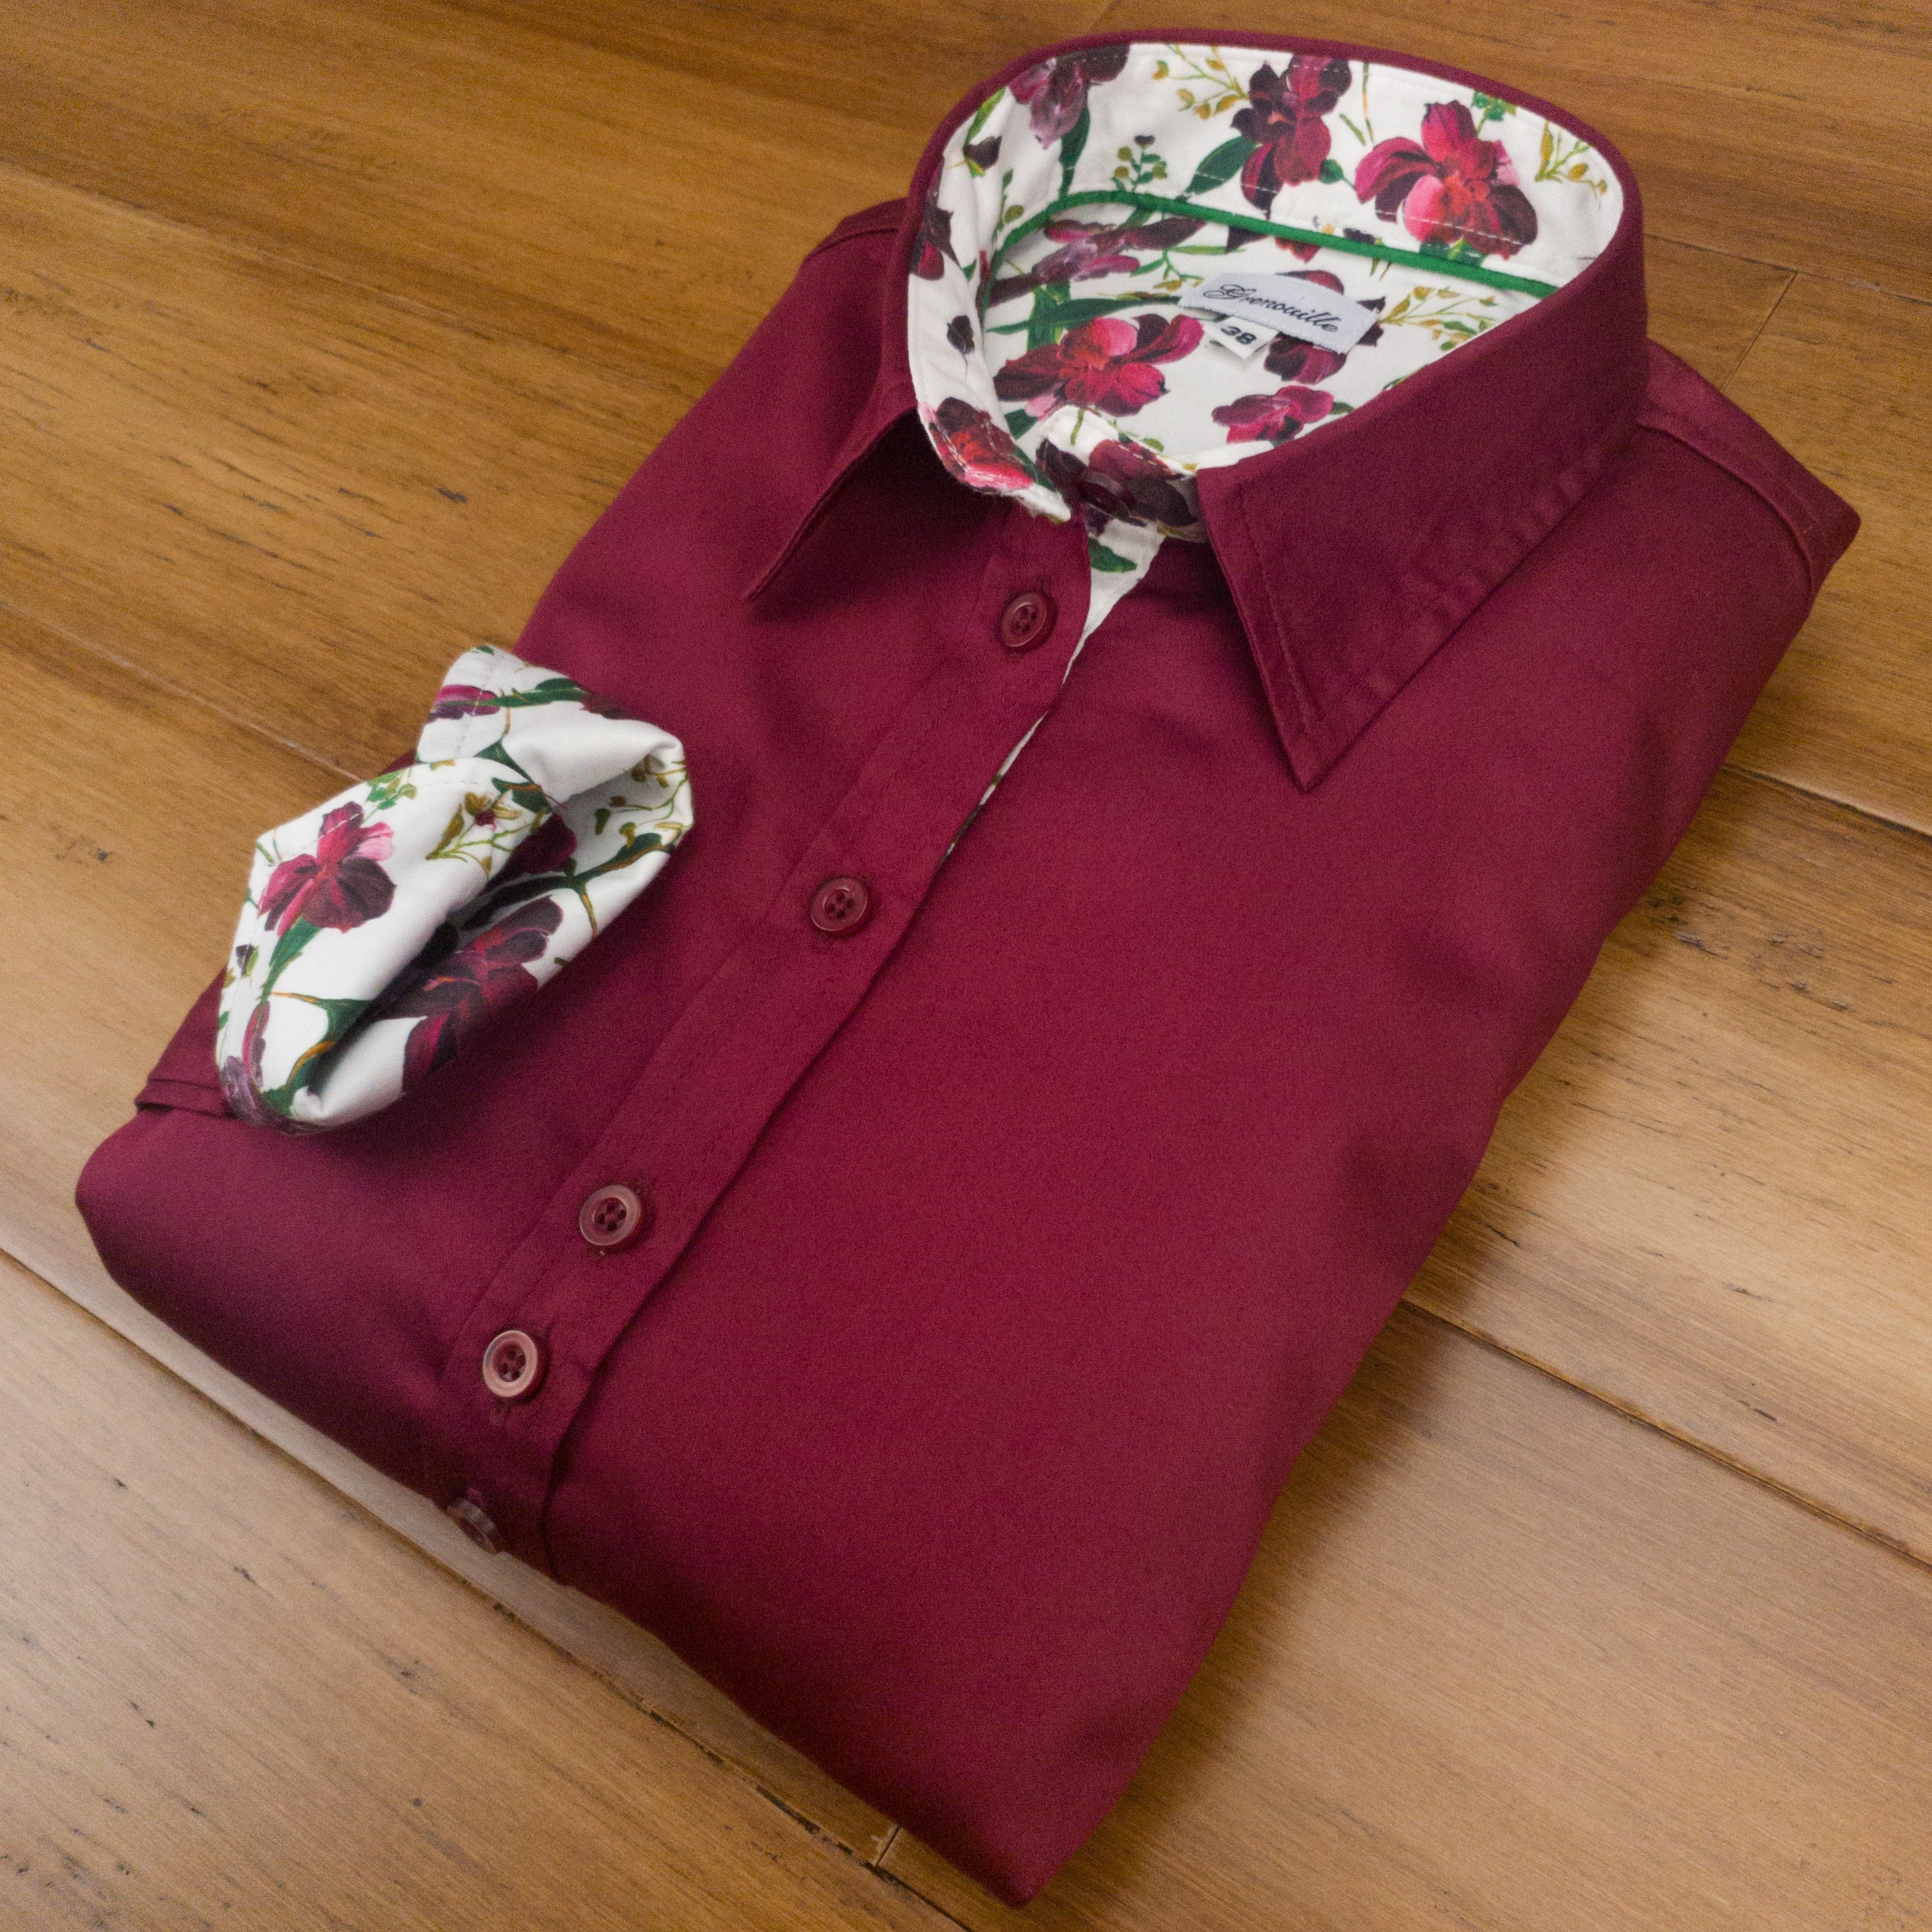 Grenouille Ladies Long Sleeve Red and Tiny White Flower Print Shirt - Size 42